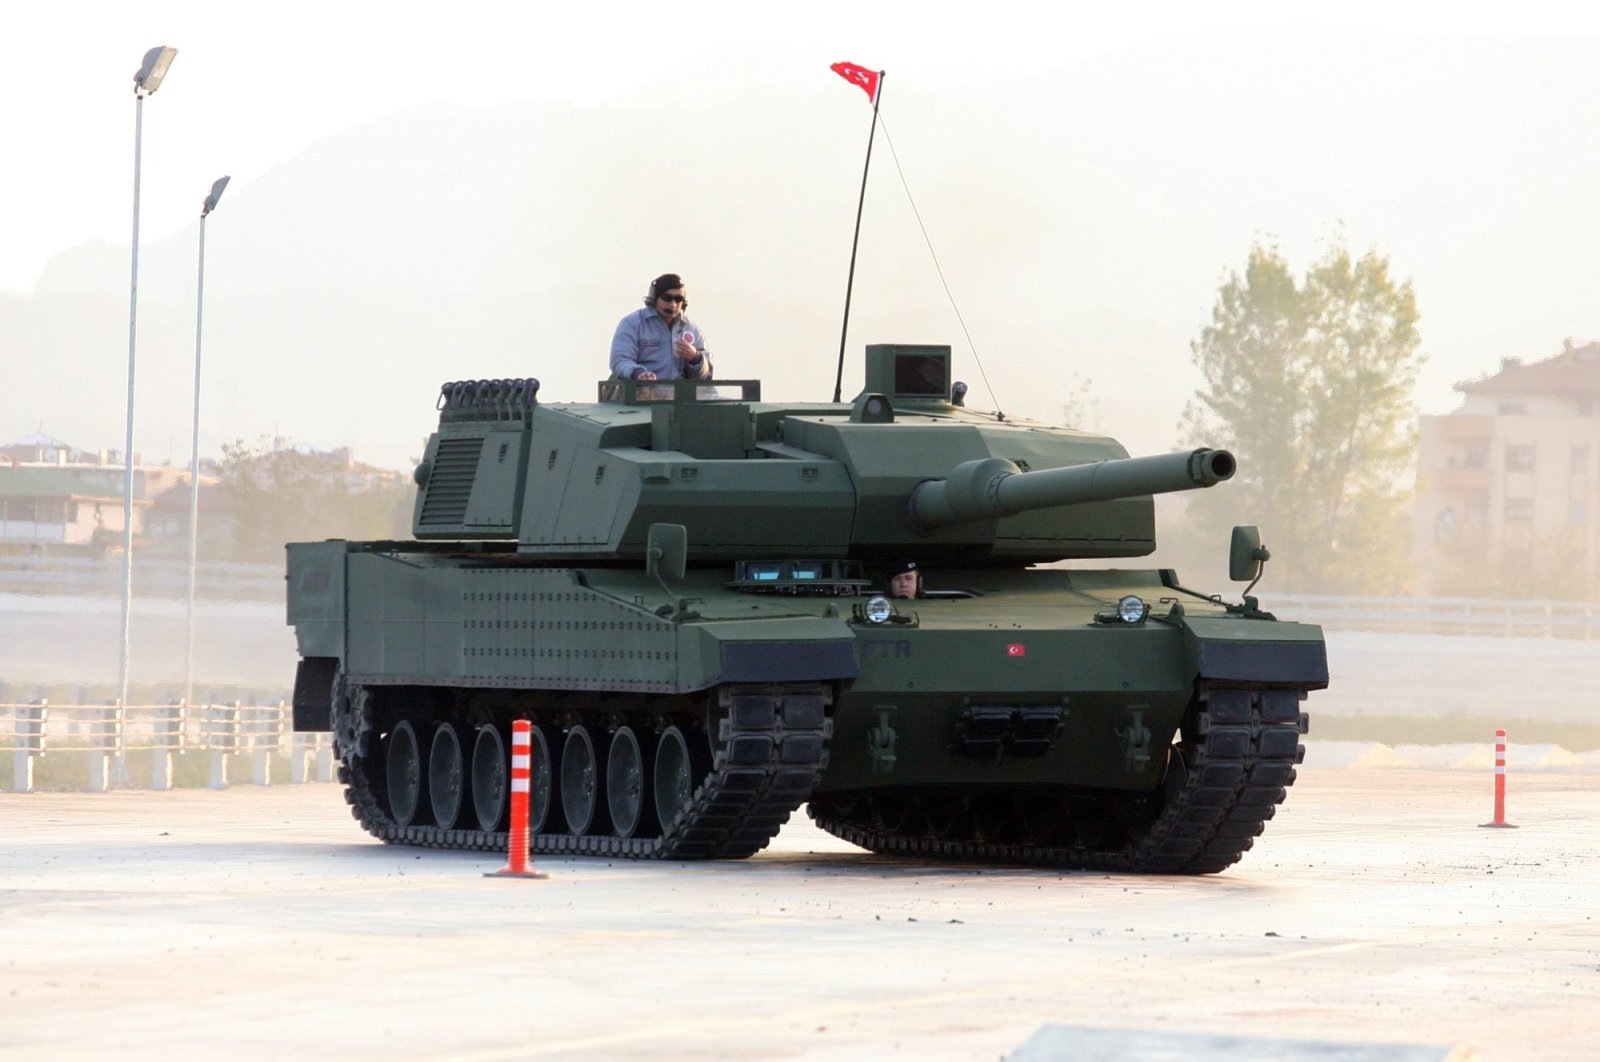 Turkey's main battle tank Altay seen in this file photo, Nov. 15, 2012. (Photo by Mesut Er)